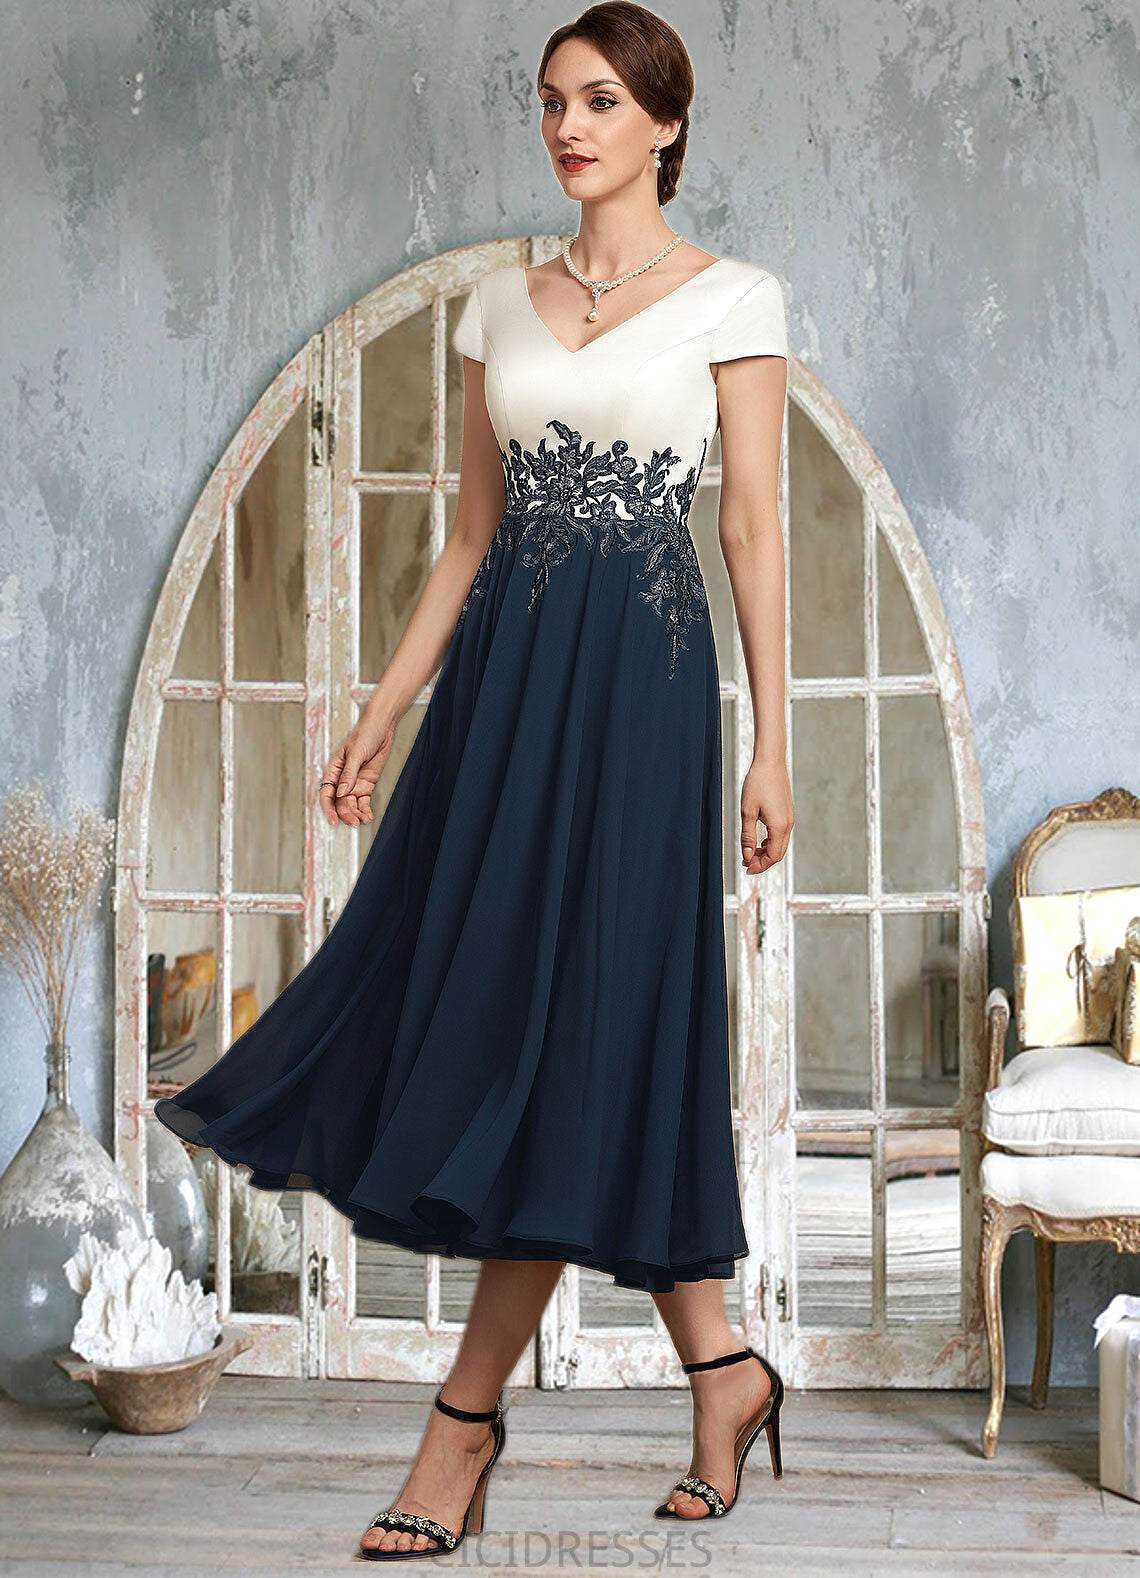 Thirza A-Line V-neck Tea-Length Chiffon Lace Mother of the Bride Dress CIC8126P0014539